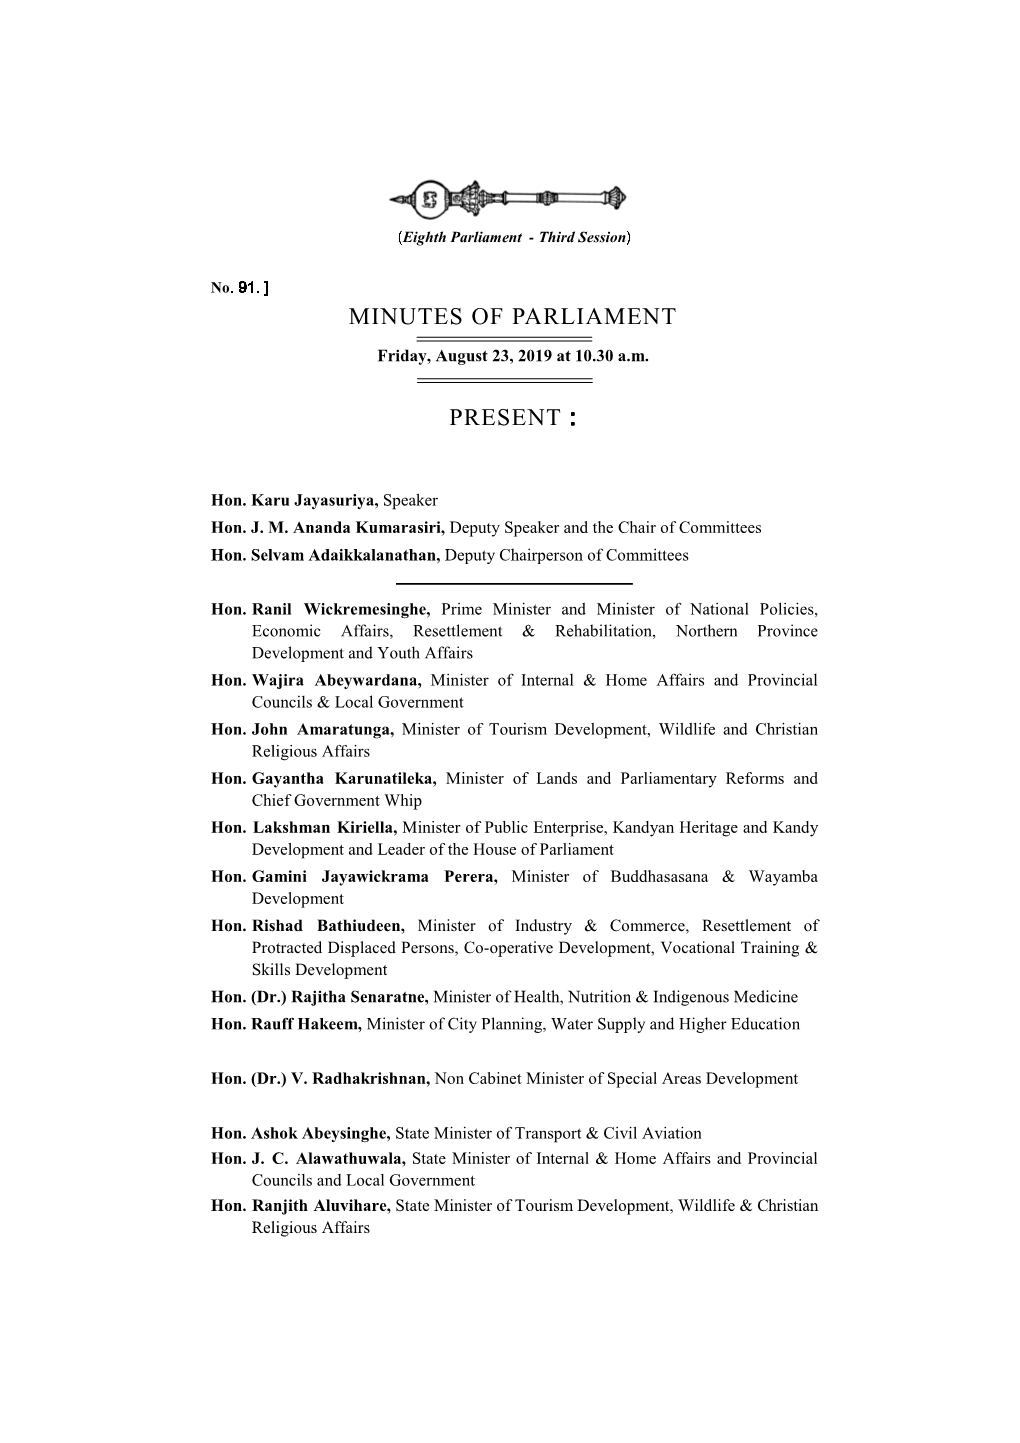 Minutes of Parliament for 23.08.2019